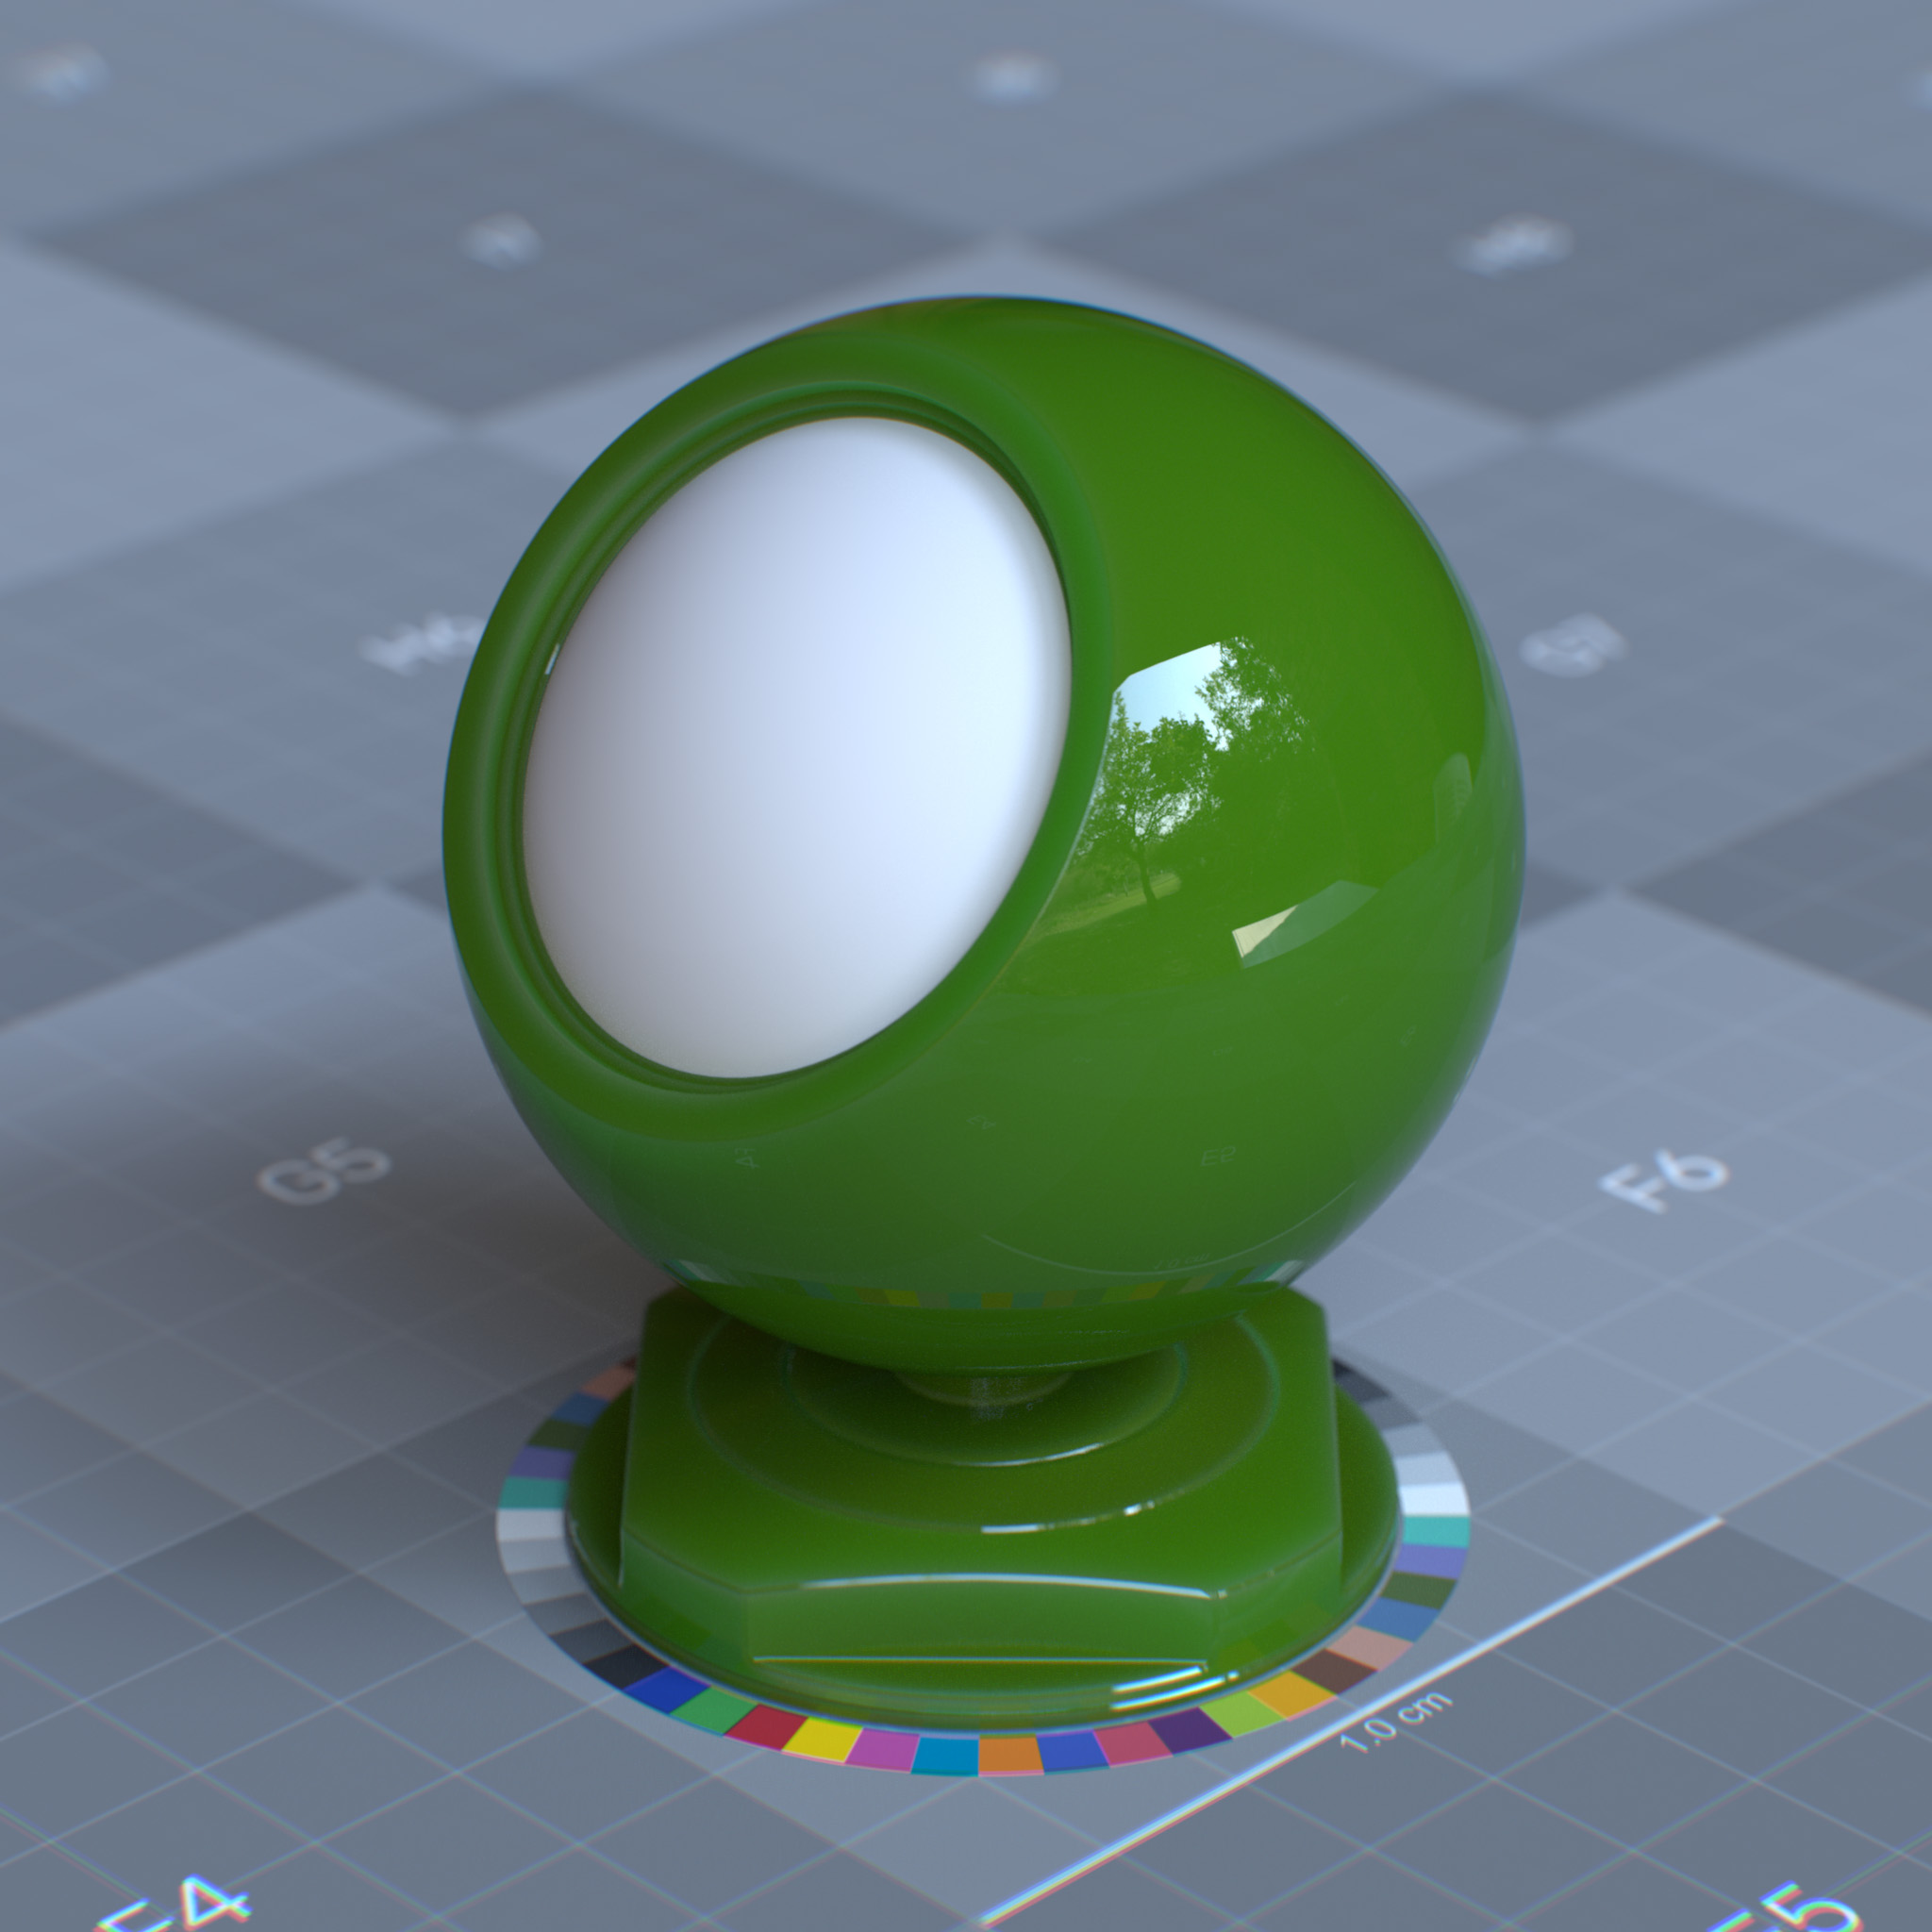 rtx_material_omnisurfacebase_specular_reflection_roughness_0p0